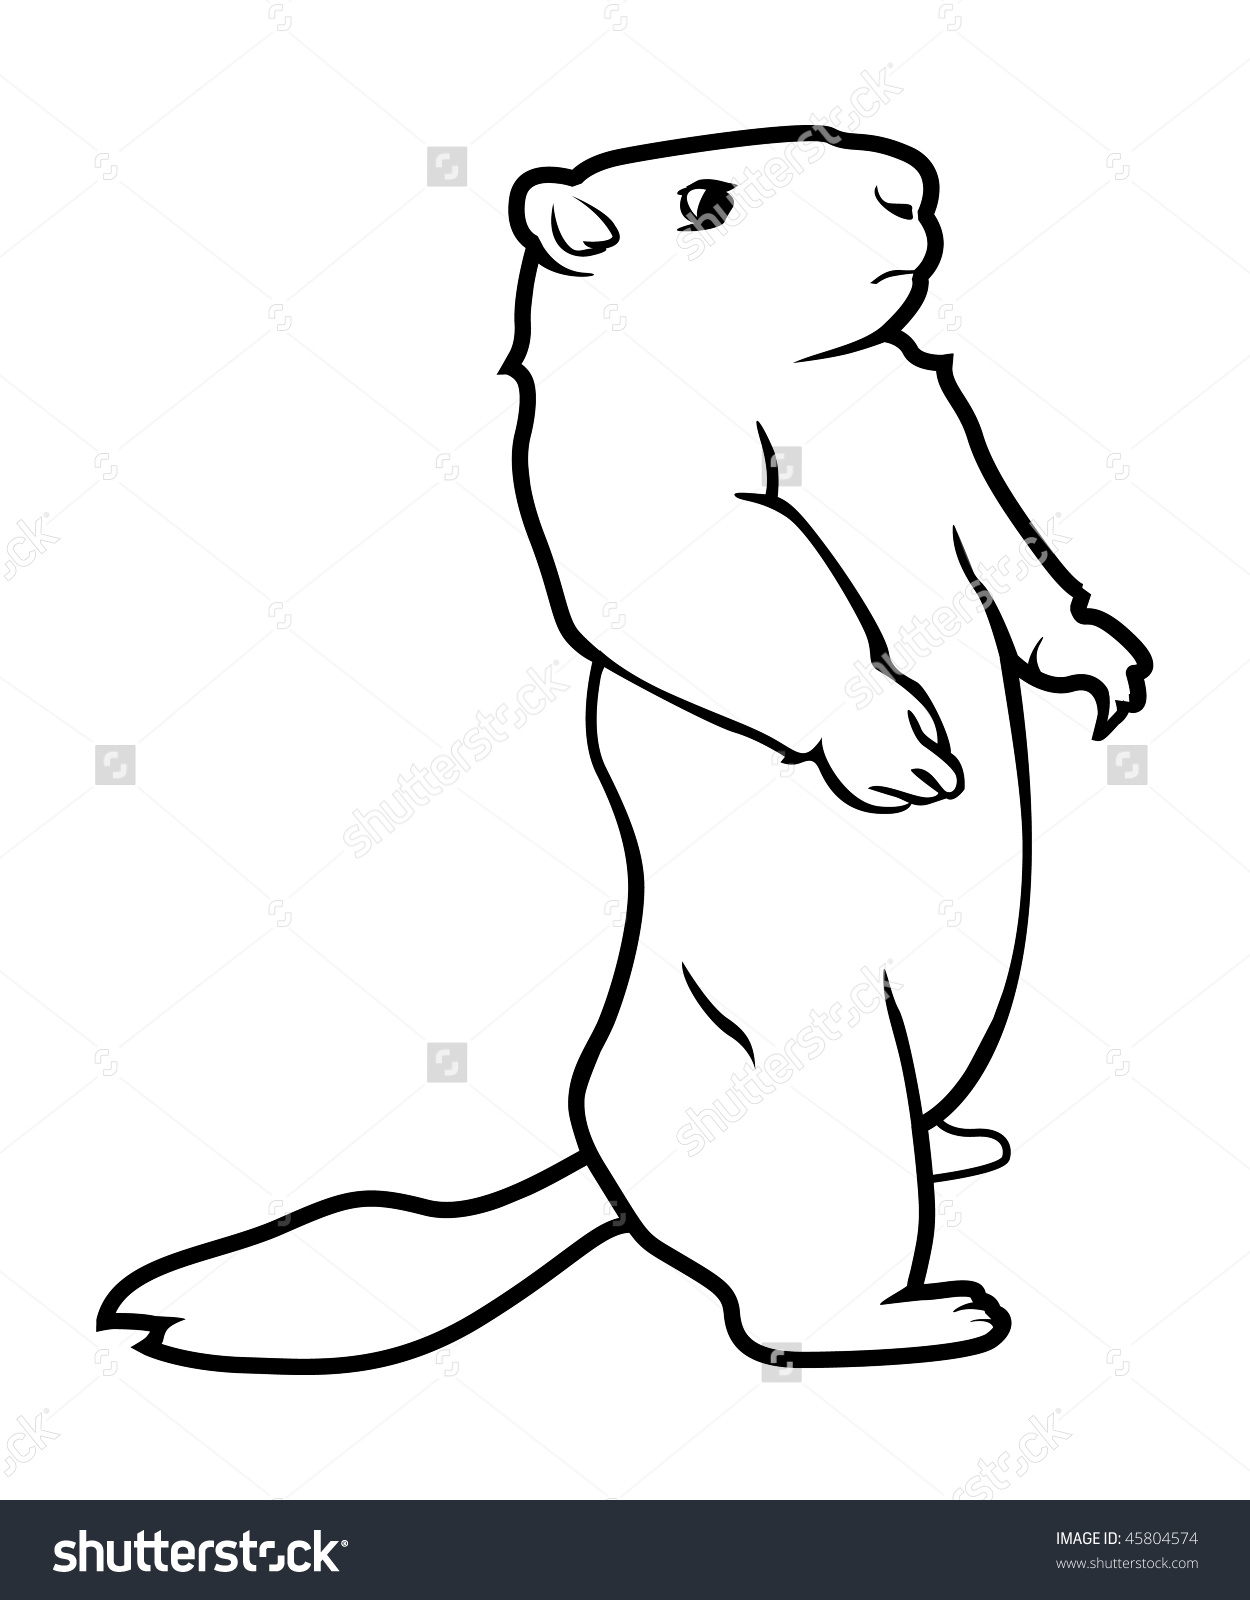 Prairie Dog clipart #14, Download drawings